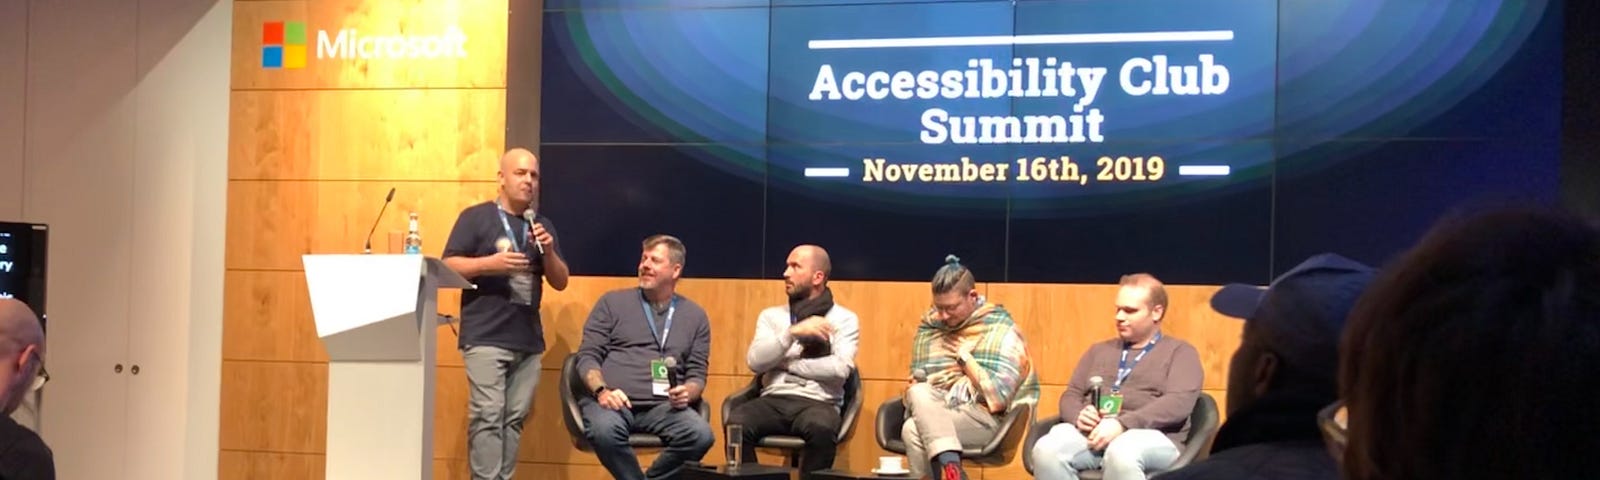 Panel discussion between 4 people that occurred on stage at the end of the event.